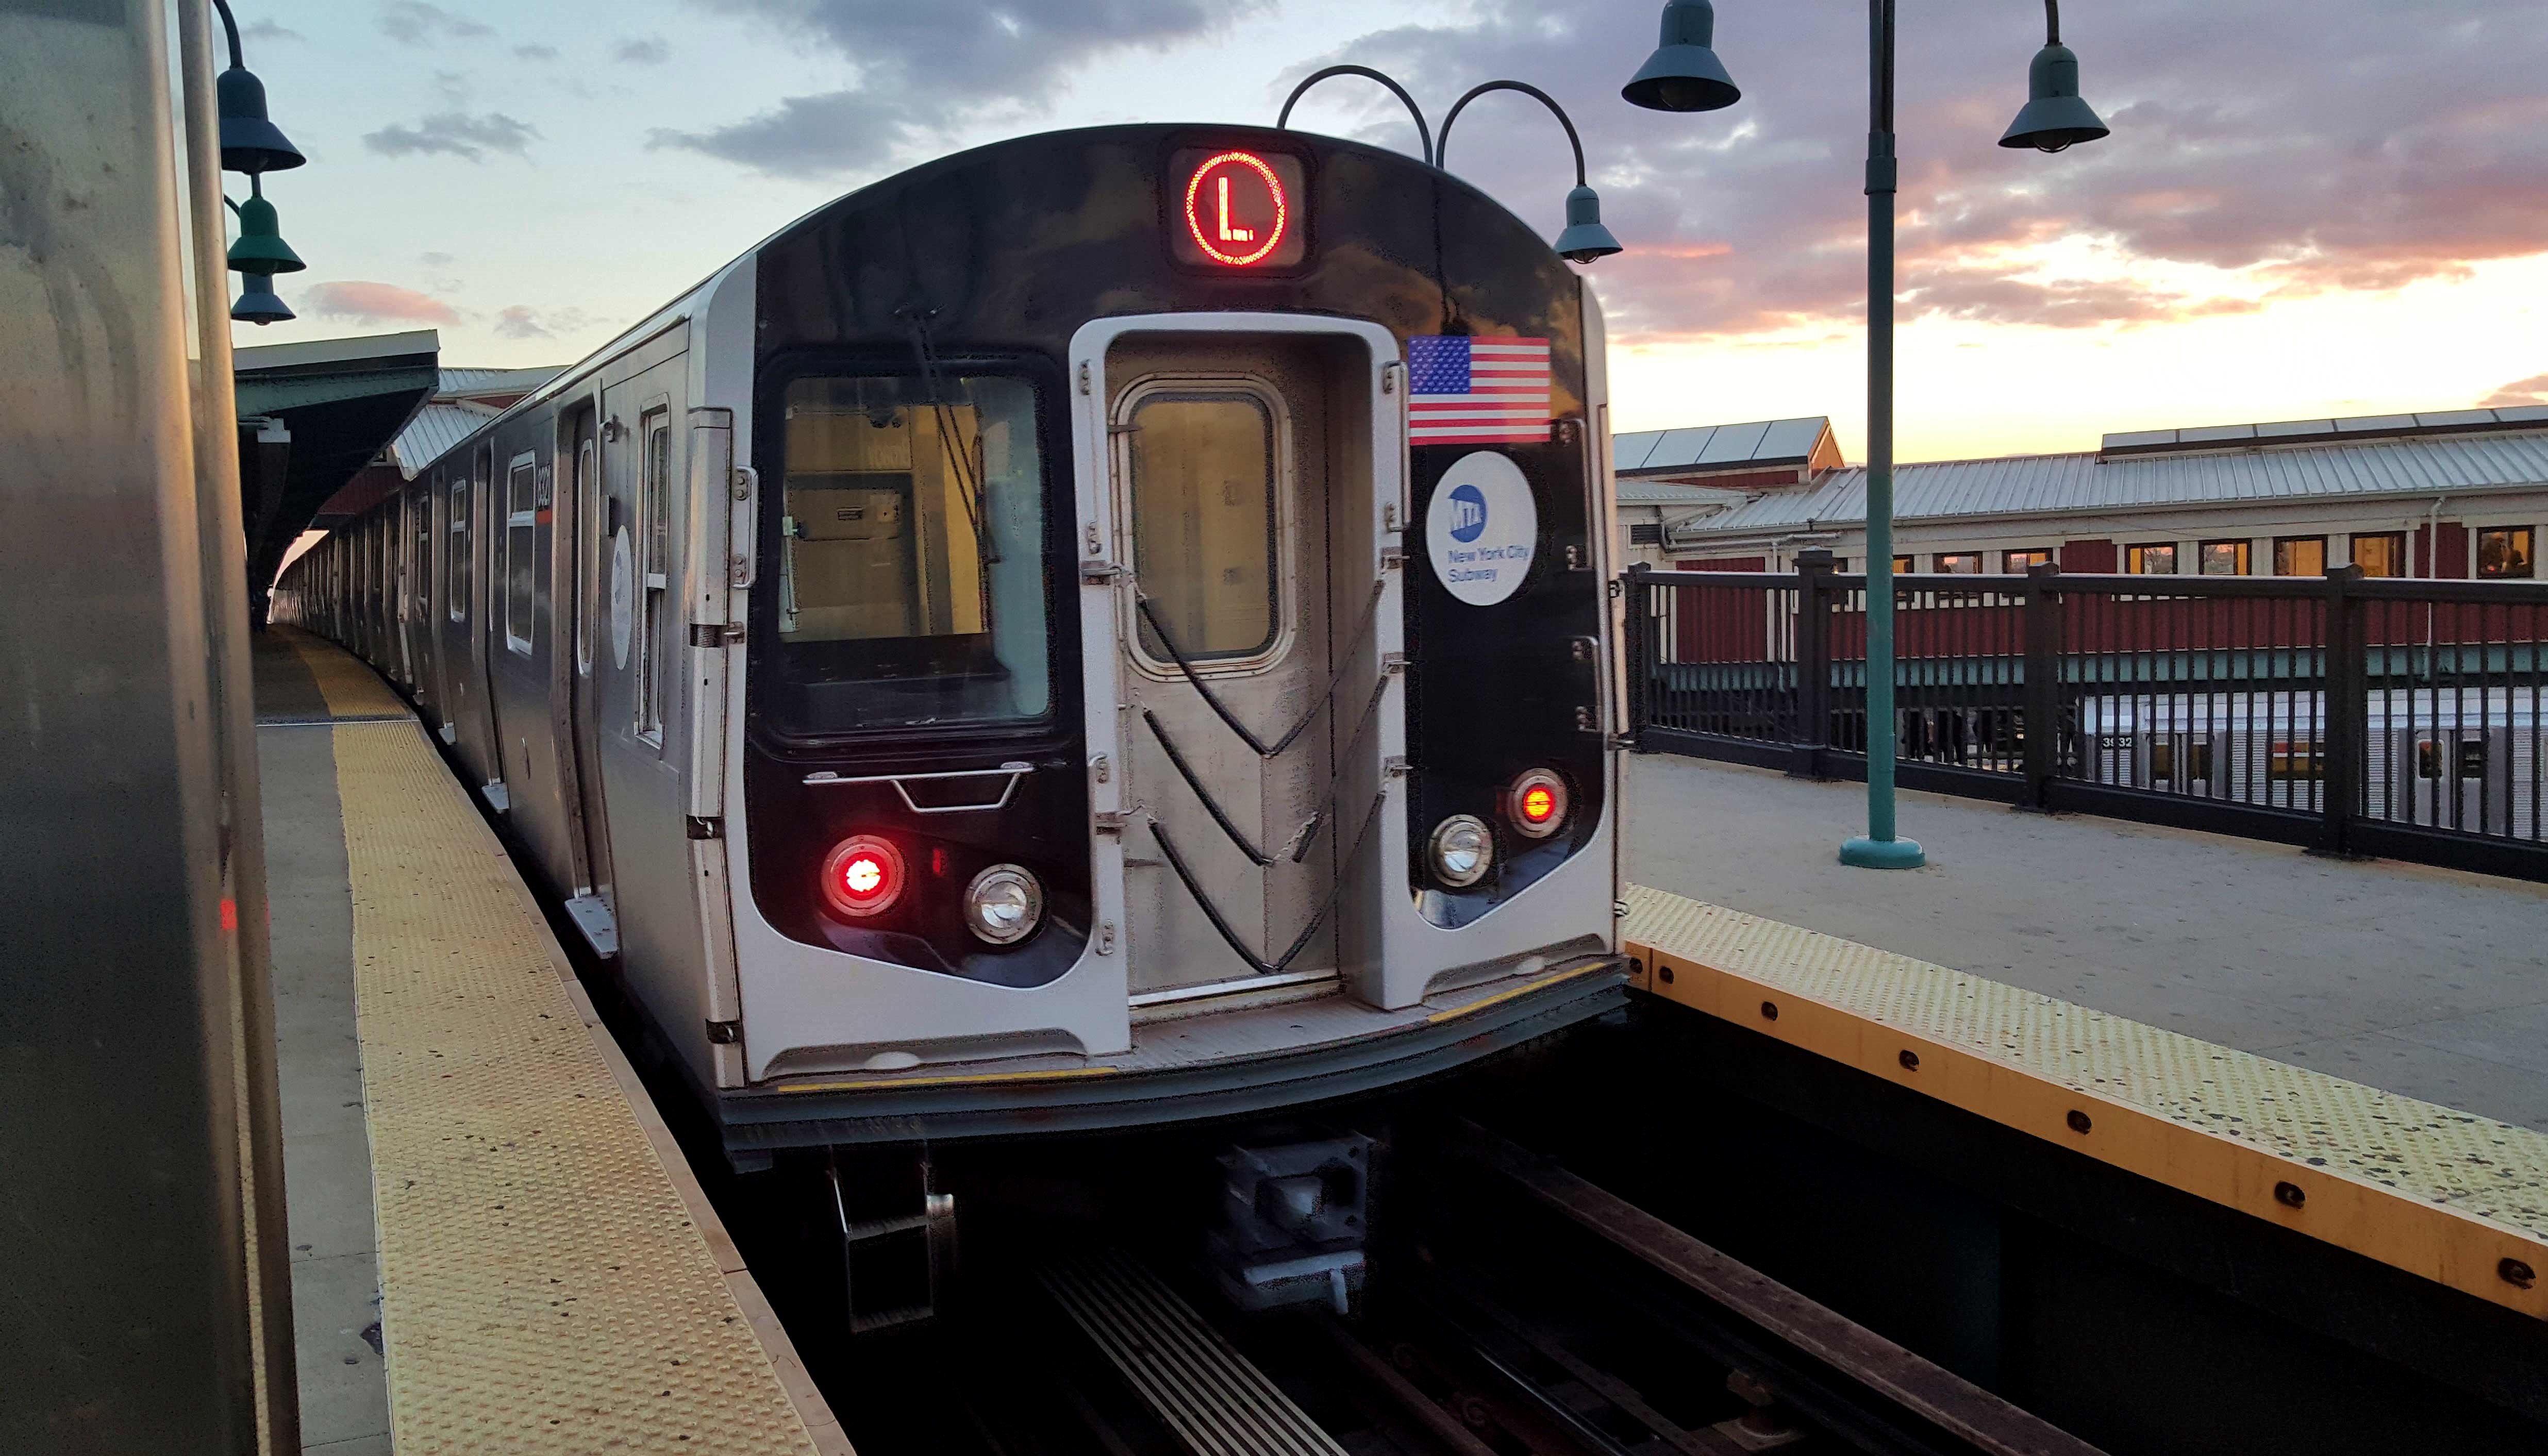 It's Official: The L Train Will Shut Down In 2019 For 18 Months